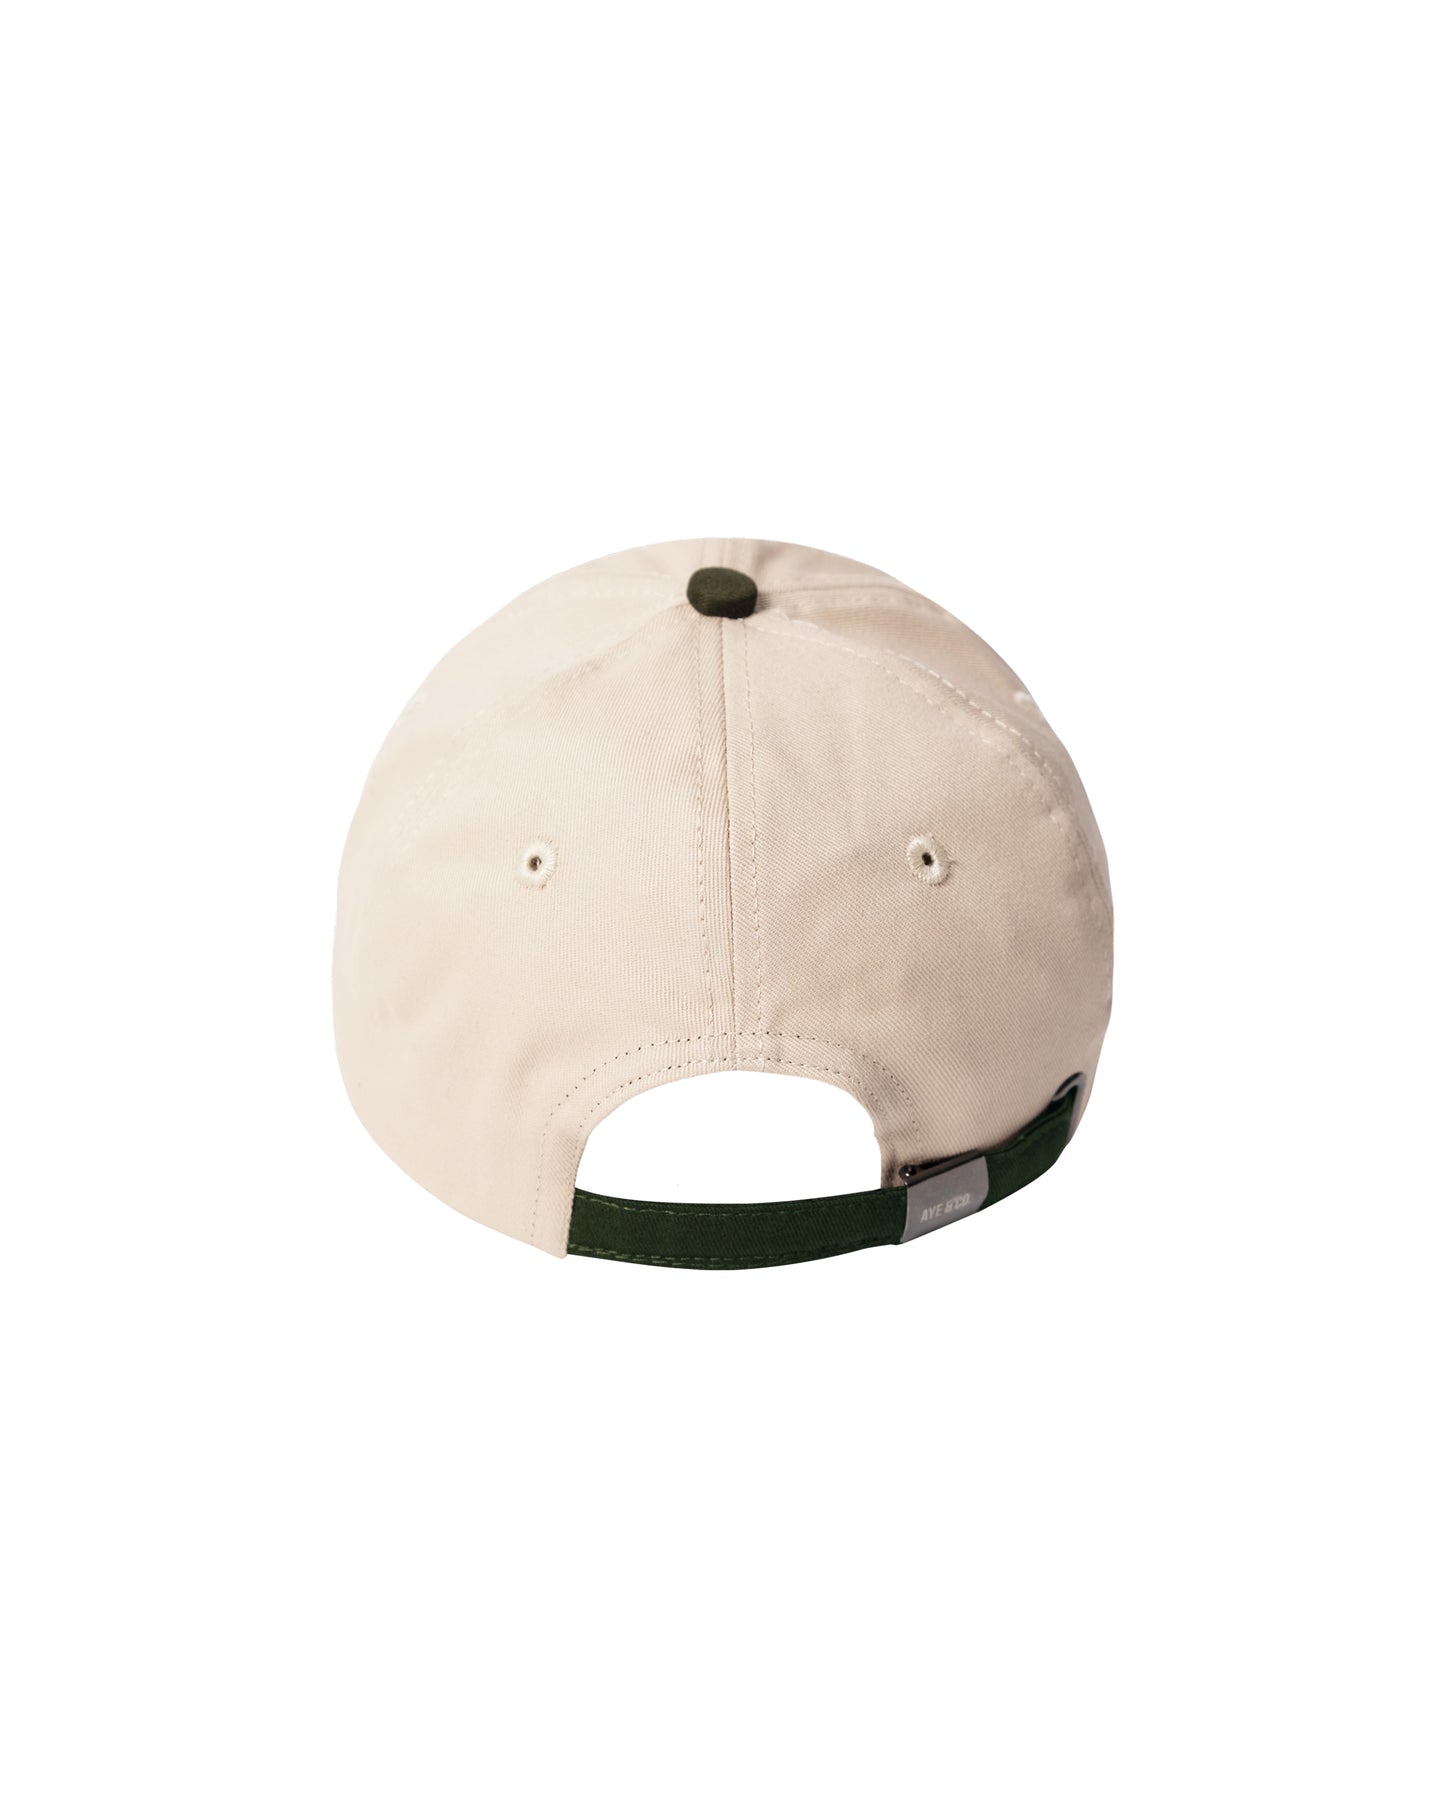 Anabe Two Tone Cap - Green